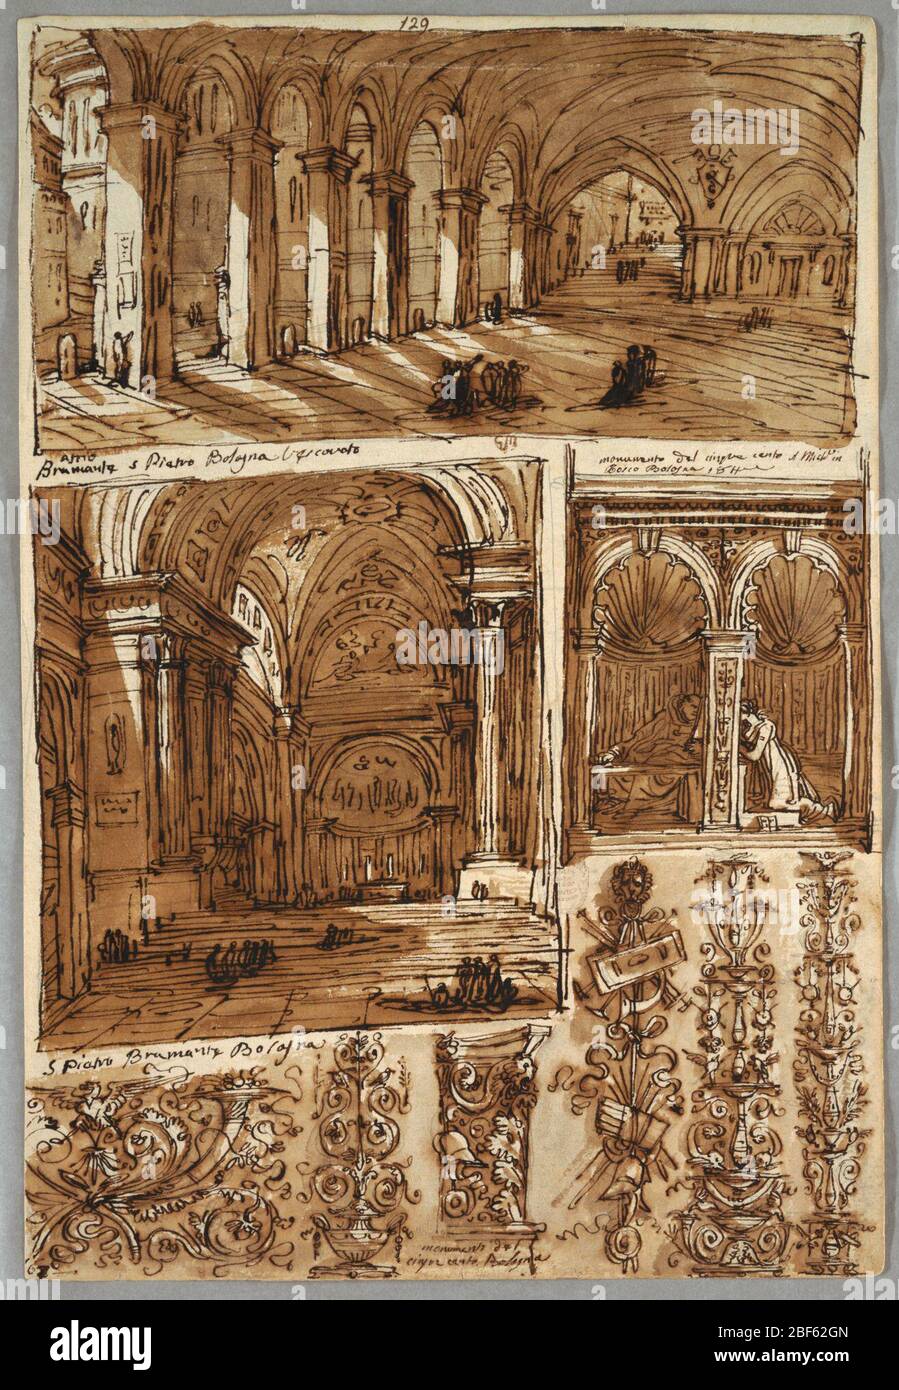 Sketchbook Page Atrium San Pietro Bologna and Detail from San Pietro Detail from S Michele in Bosco Verso Geometrical Studies of Heads. At top, atrium of archbishop in Bologna, shown with view of cathedral; inscribed: atrio/ Bramante s Pietro Vescovato. At left, interior of cathedral by Domenico Tibaldi, 1575; inscribed: S Pietro Bramante Bologna. At center, segment of stalls from S. Stock Photo